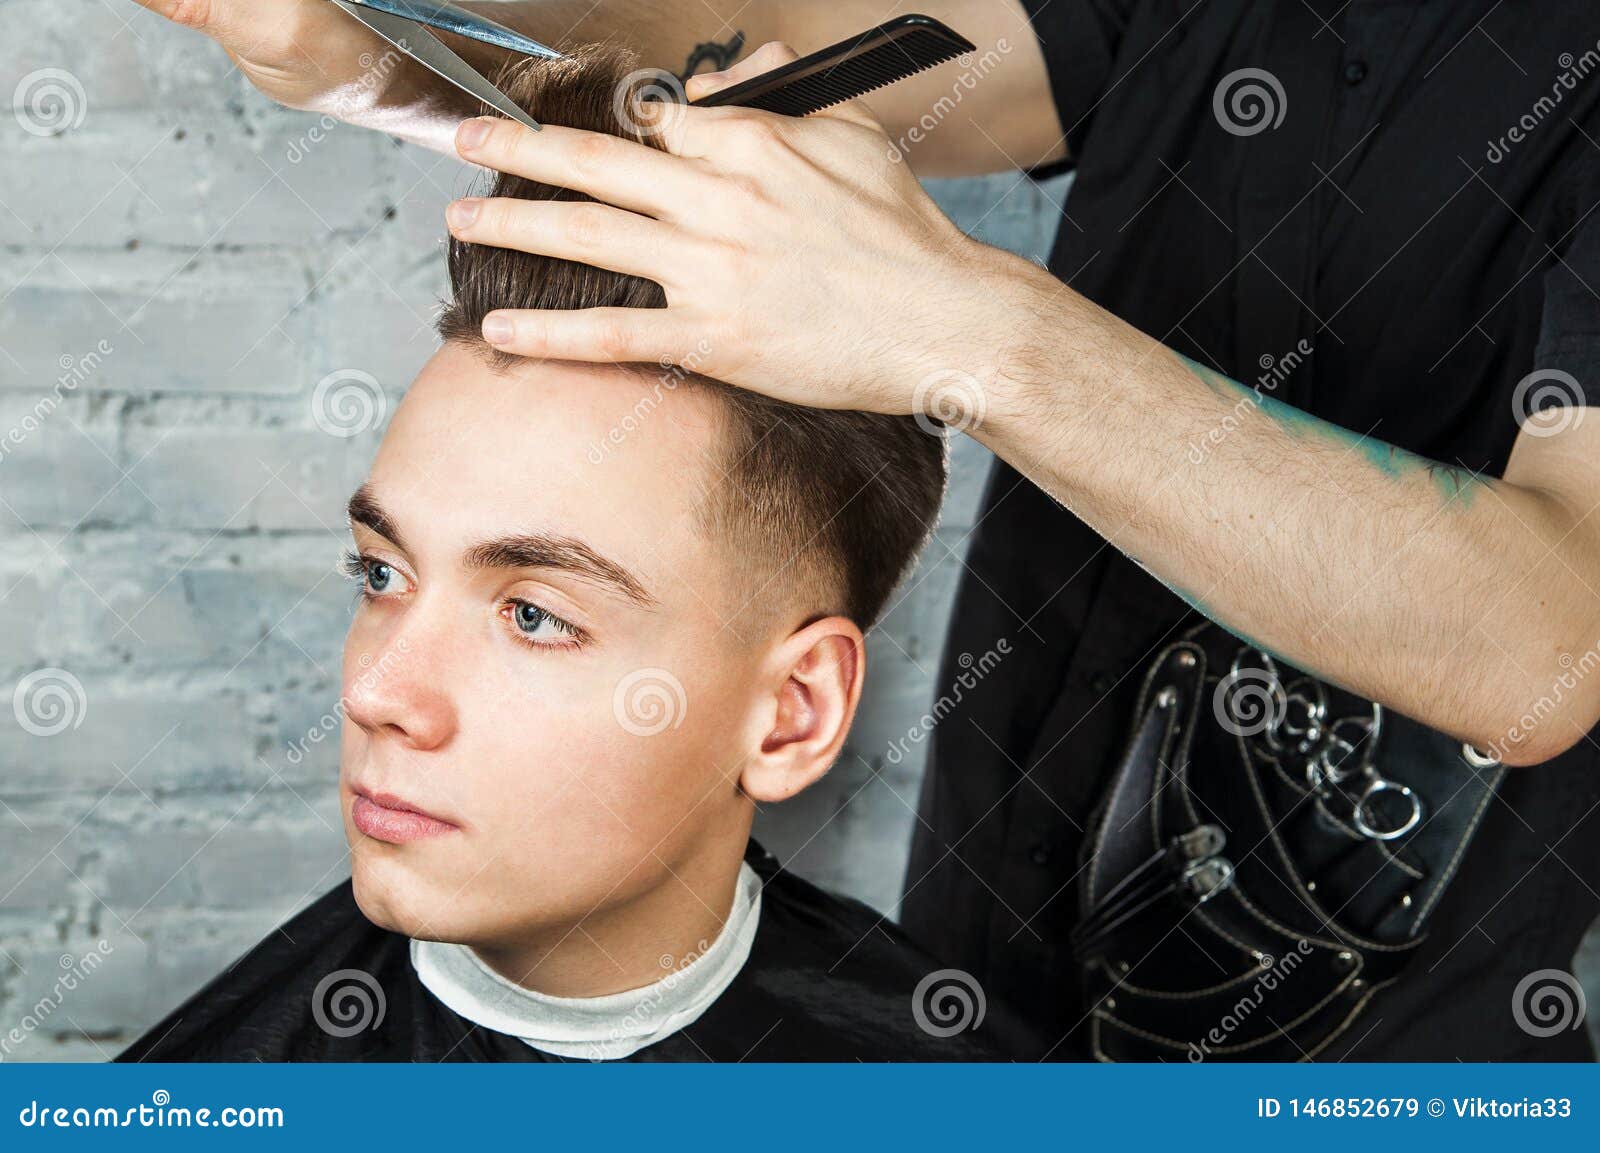 Barber Hair Styling of Young Guy in the Barbershop on Brick Wall  Background, Hairdresser Makes Hairstyle for a Young Man. Stock Image -  Image of barbershop, clippers: 146852679